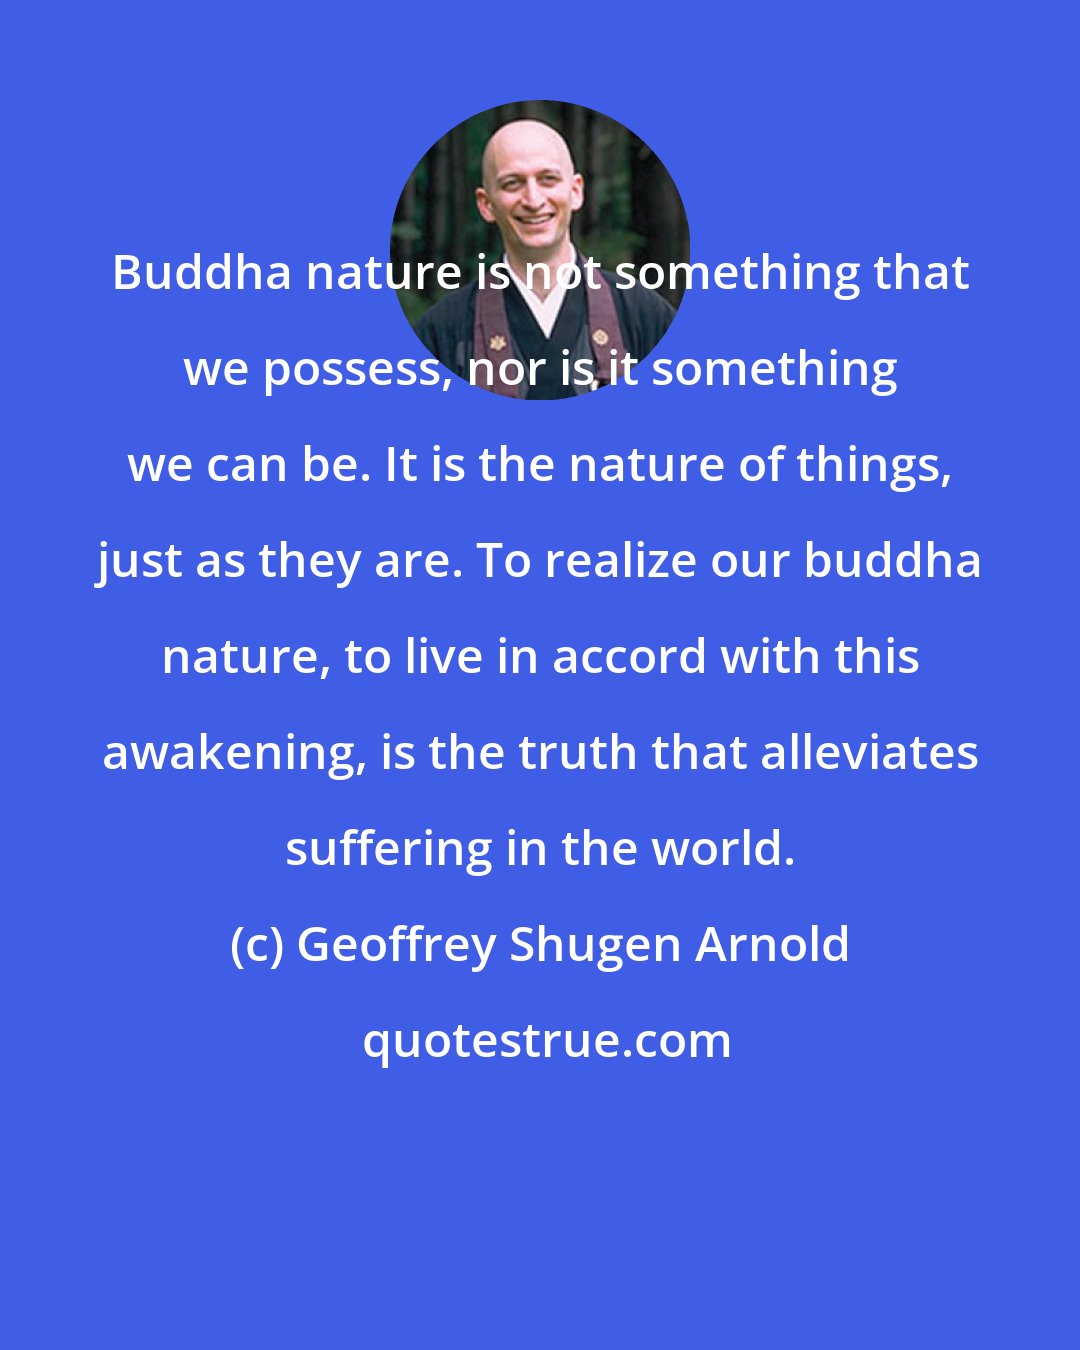 Geoffrey Shugen Arnold: Buddha nature is not something that we possess, nor is it something we can be. It is the nature of things, just as they are. To realize our buddha nature, to live in accord with this awakening, is the truth that alleviates suffering in the world.